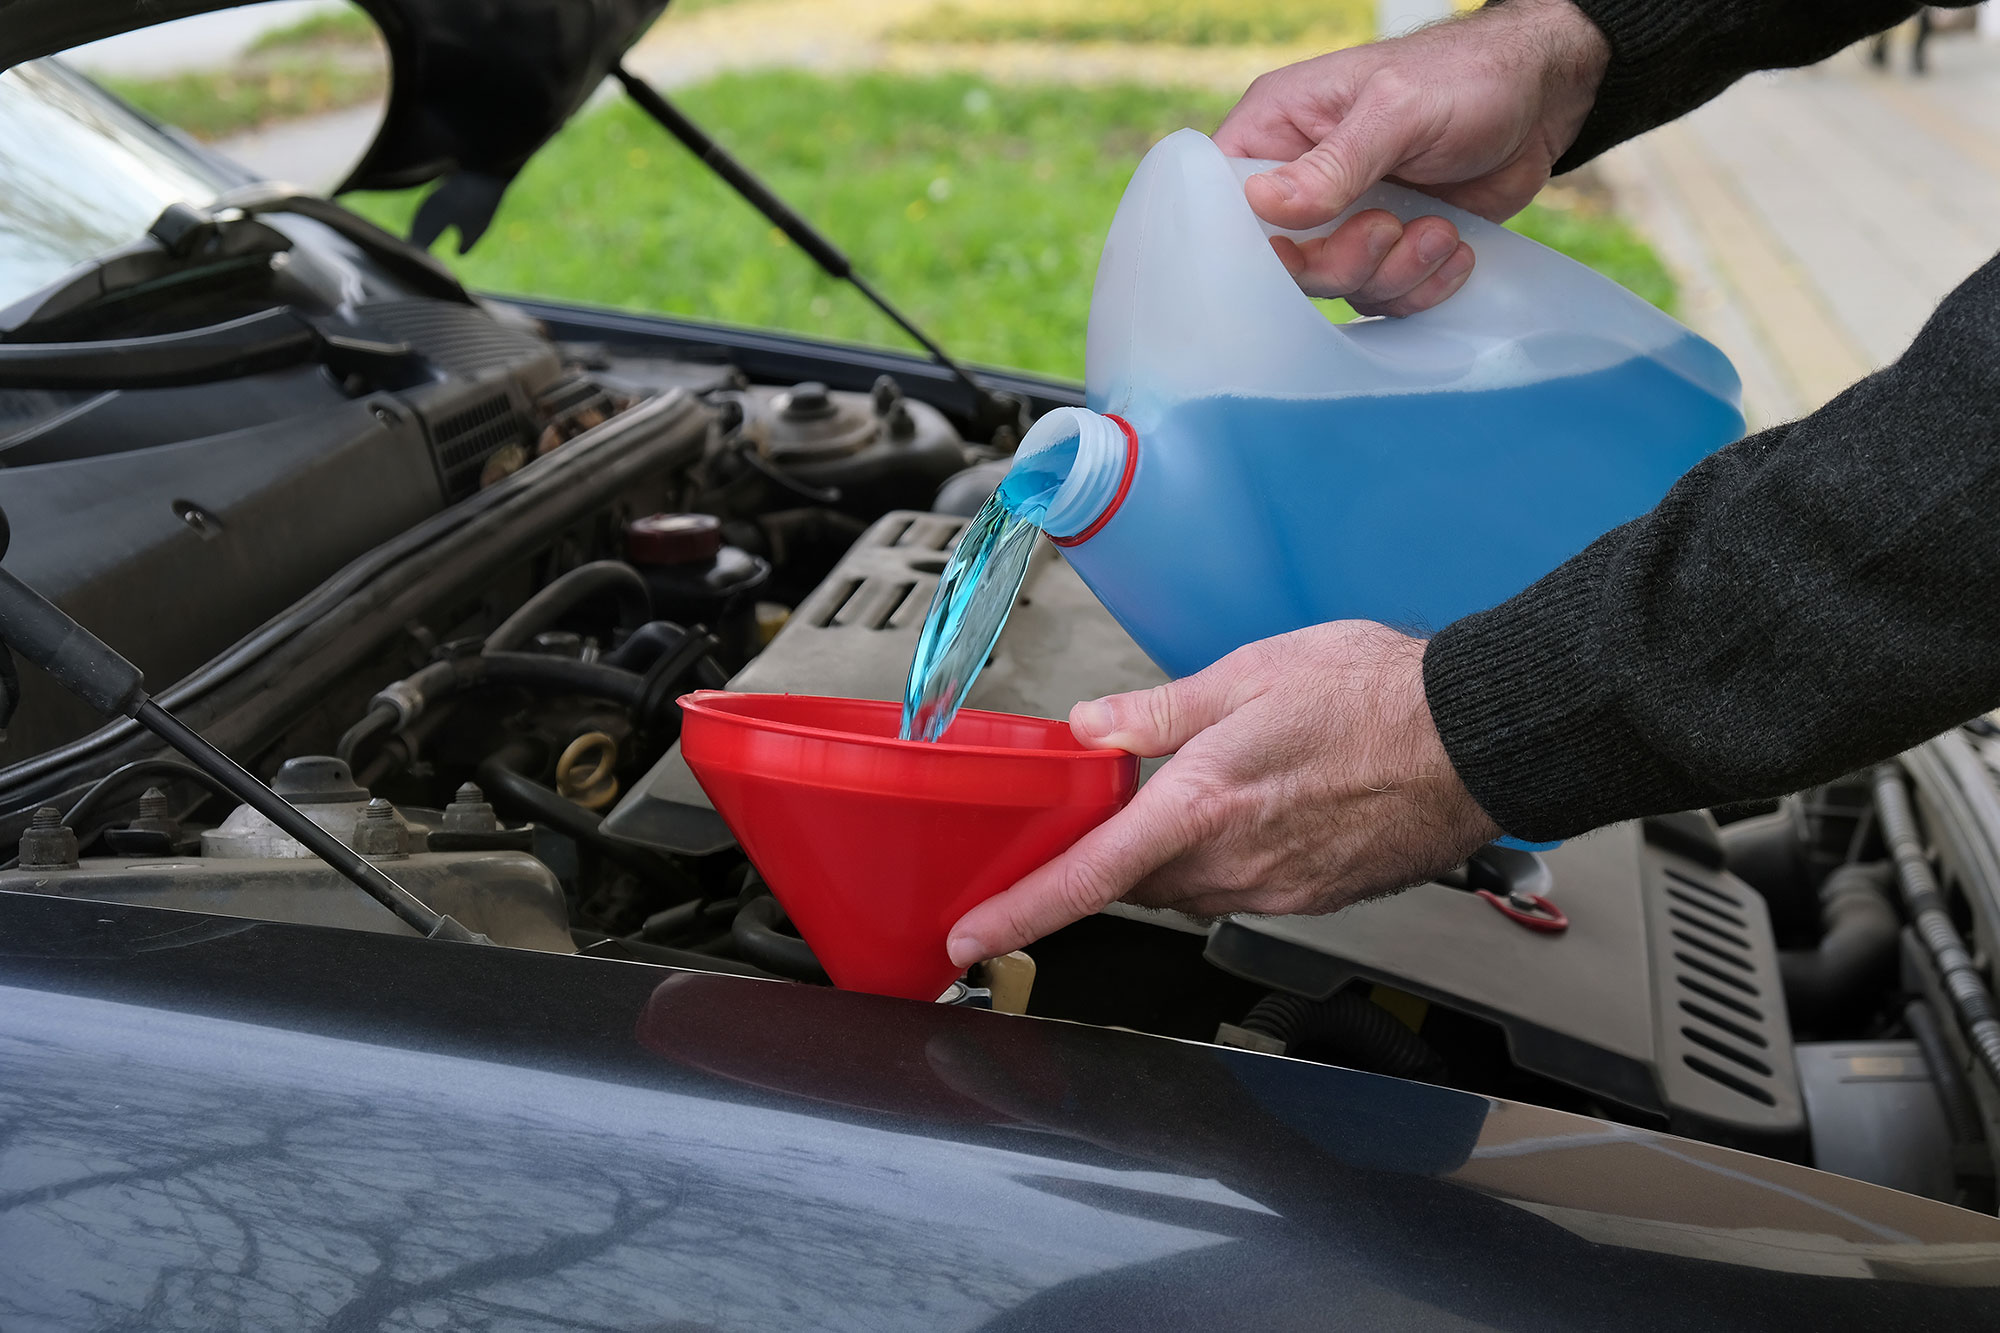 Know When To Refill Your Windshield Wiper Fluid